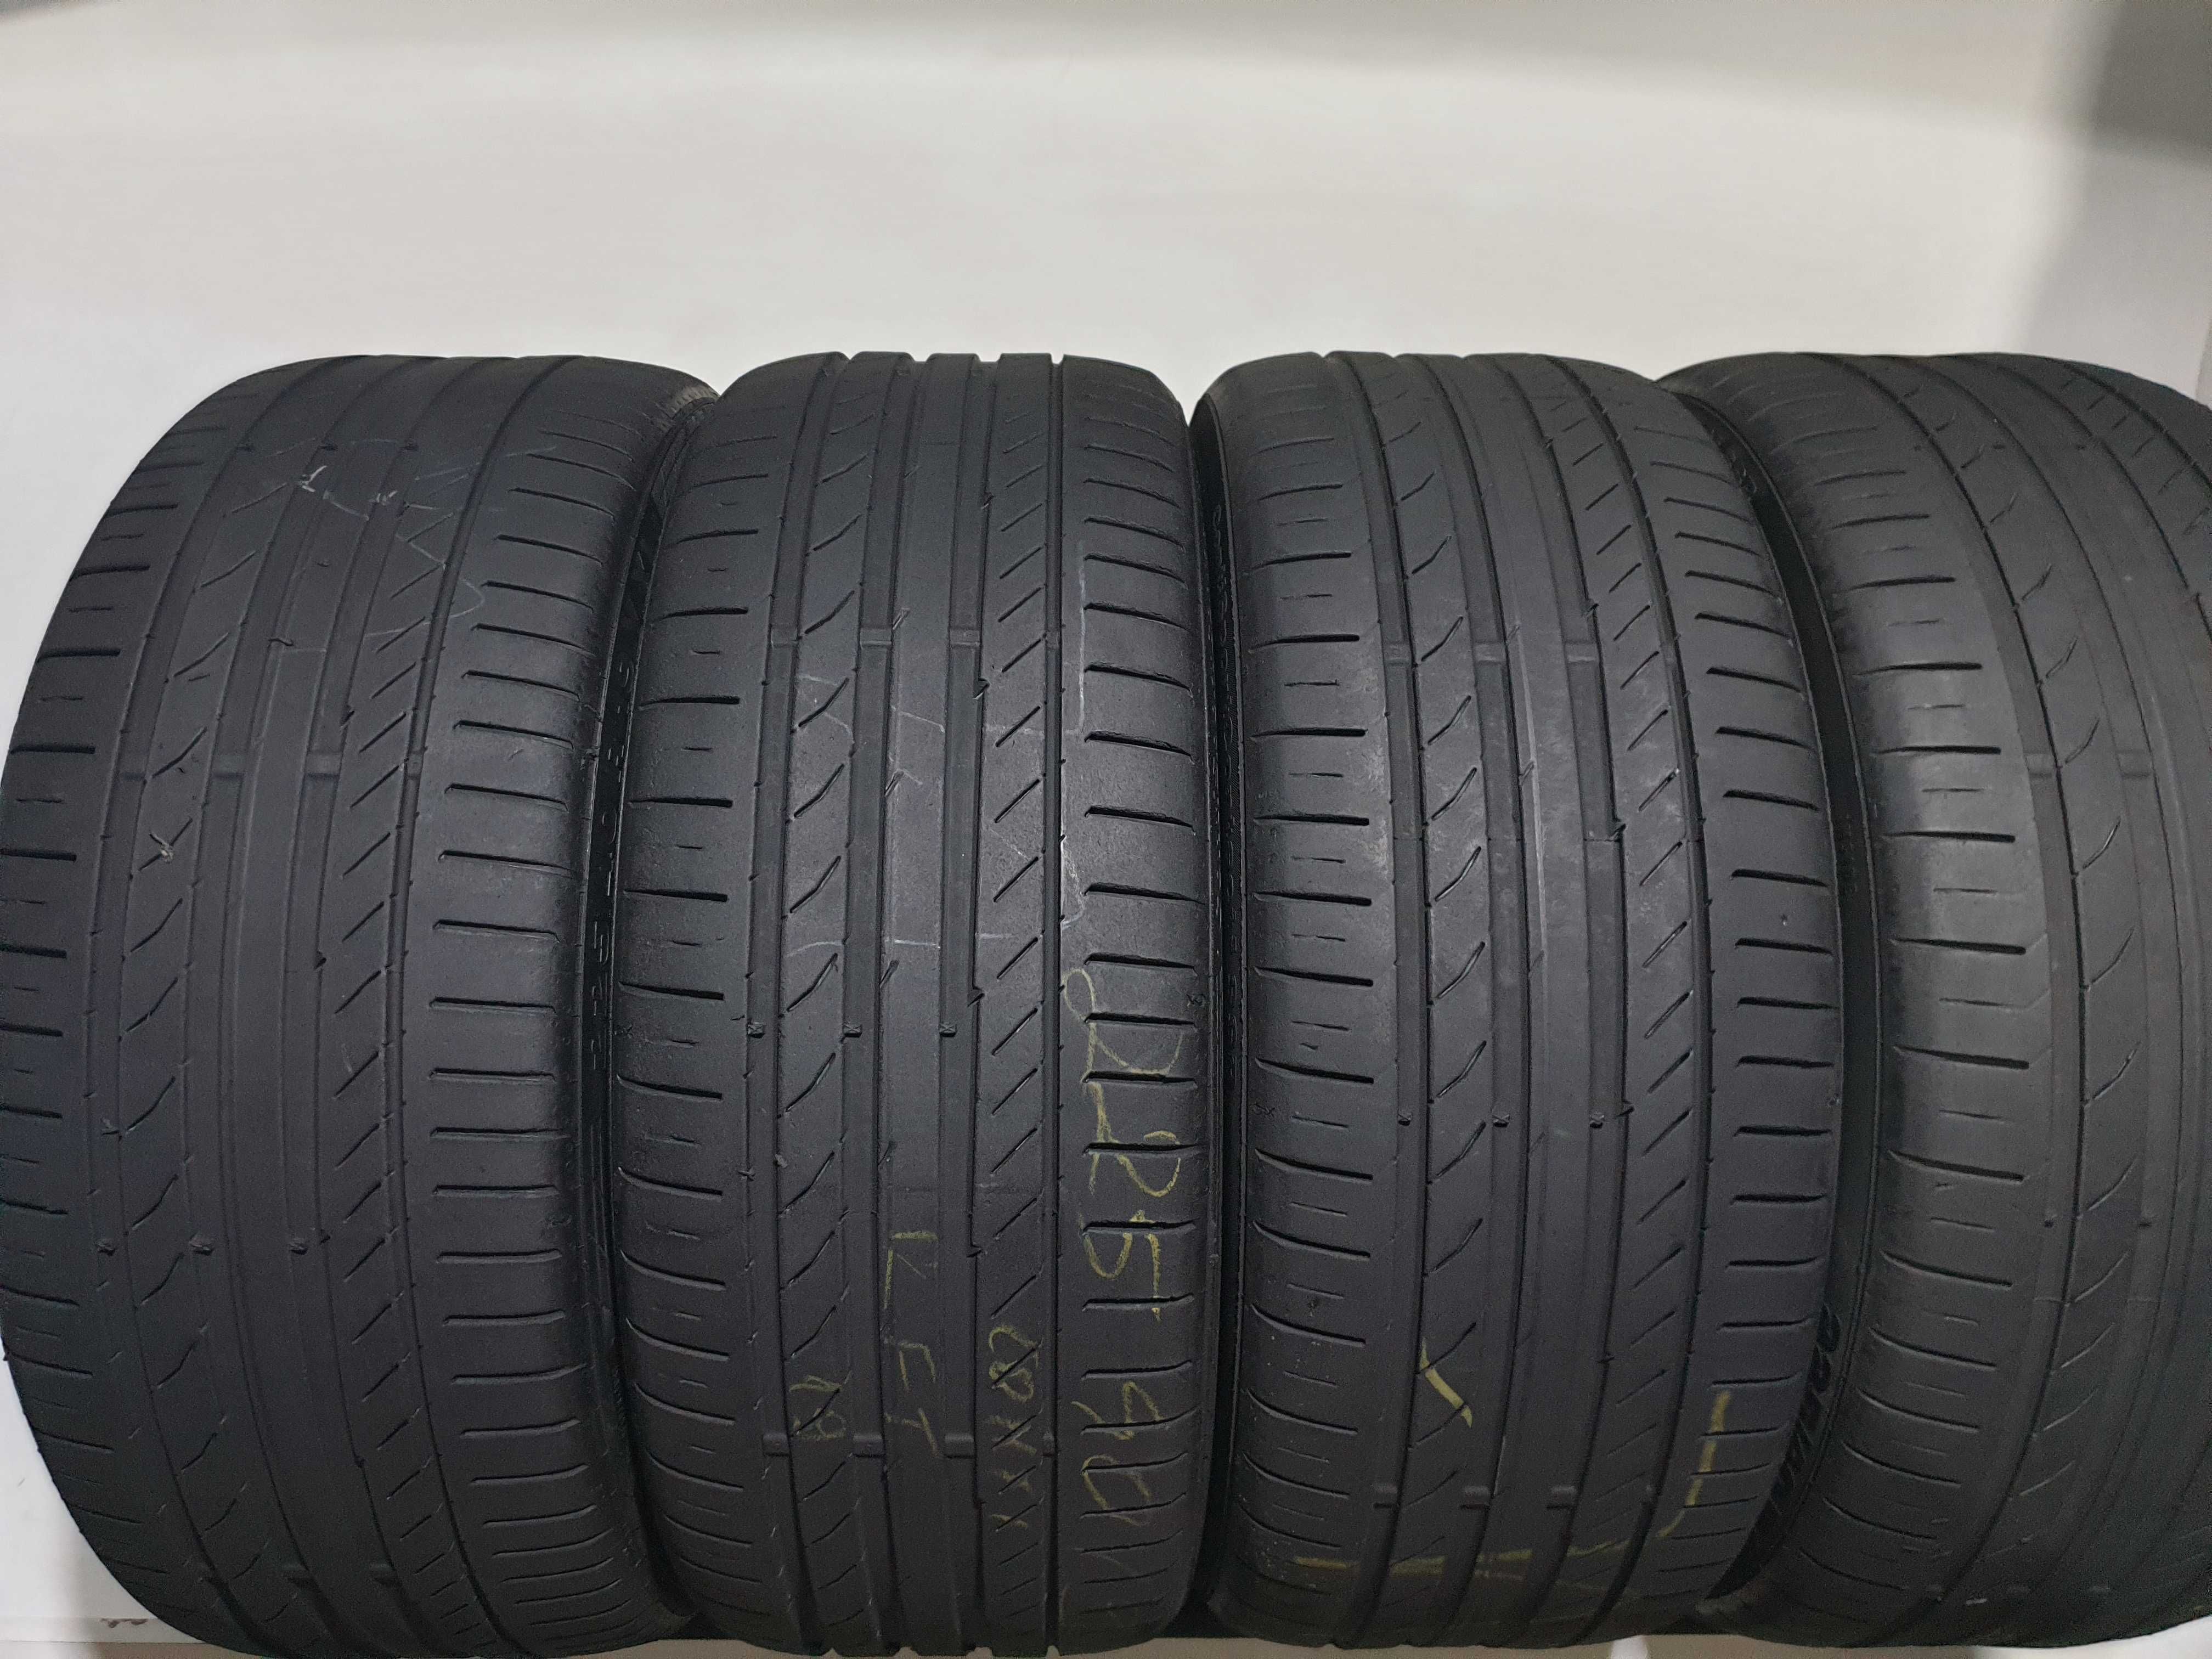 Anvelope Second Hand Continental Vara-225/40 R19 93Y,in stoc R17/18/20